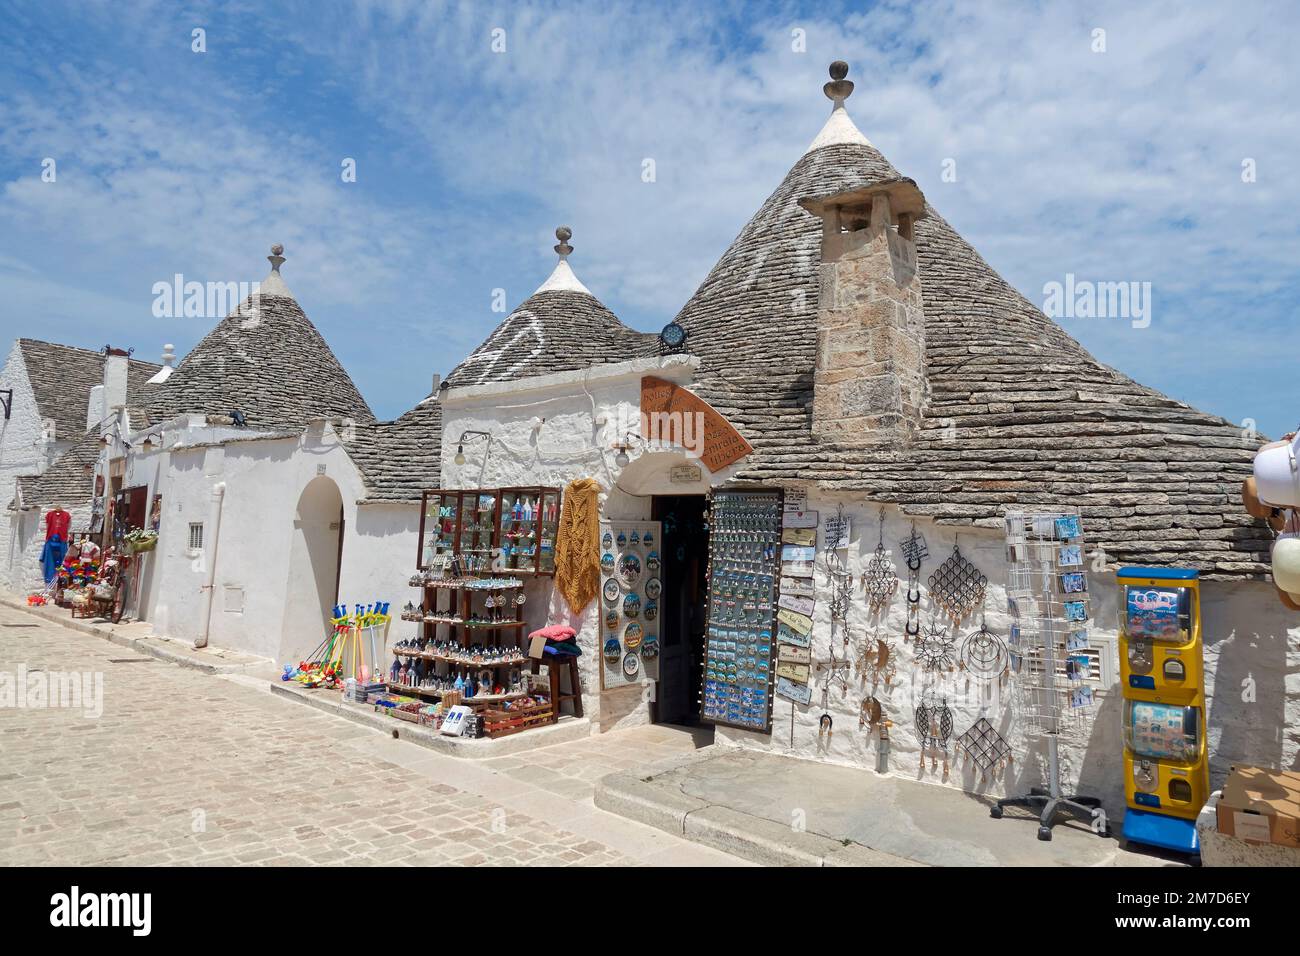 Trulli (traditional dry stone buildings with conical roofs) used as souvenir shops at Alberobello, Apulia (Puglia), Southern Italy. Stock Photo